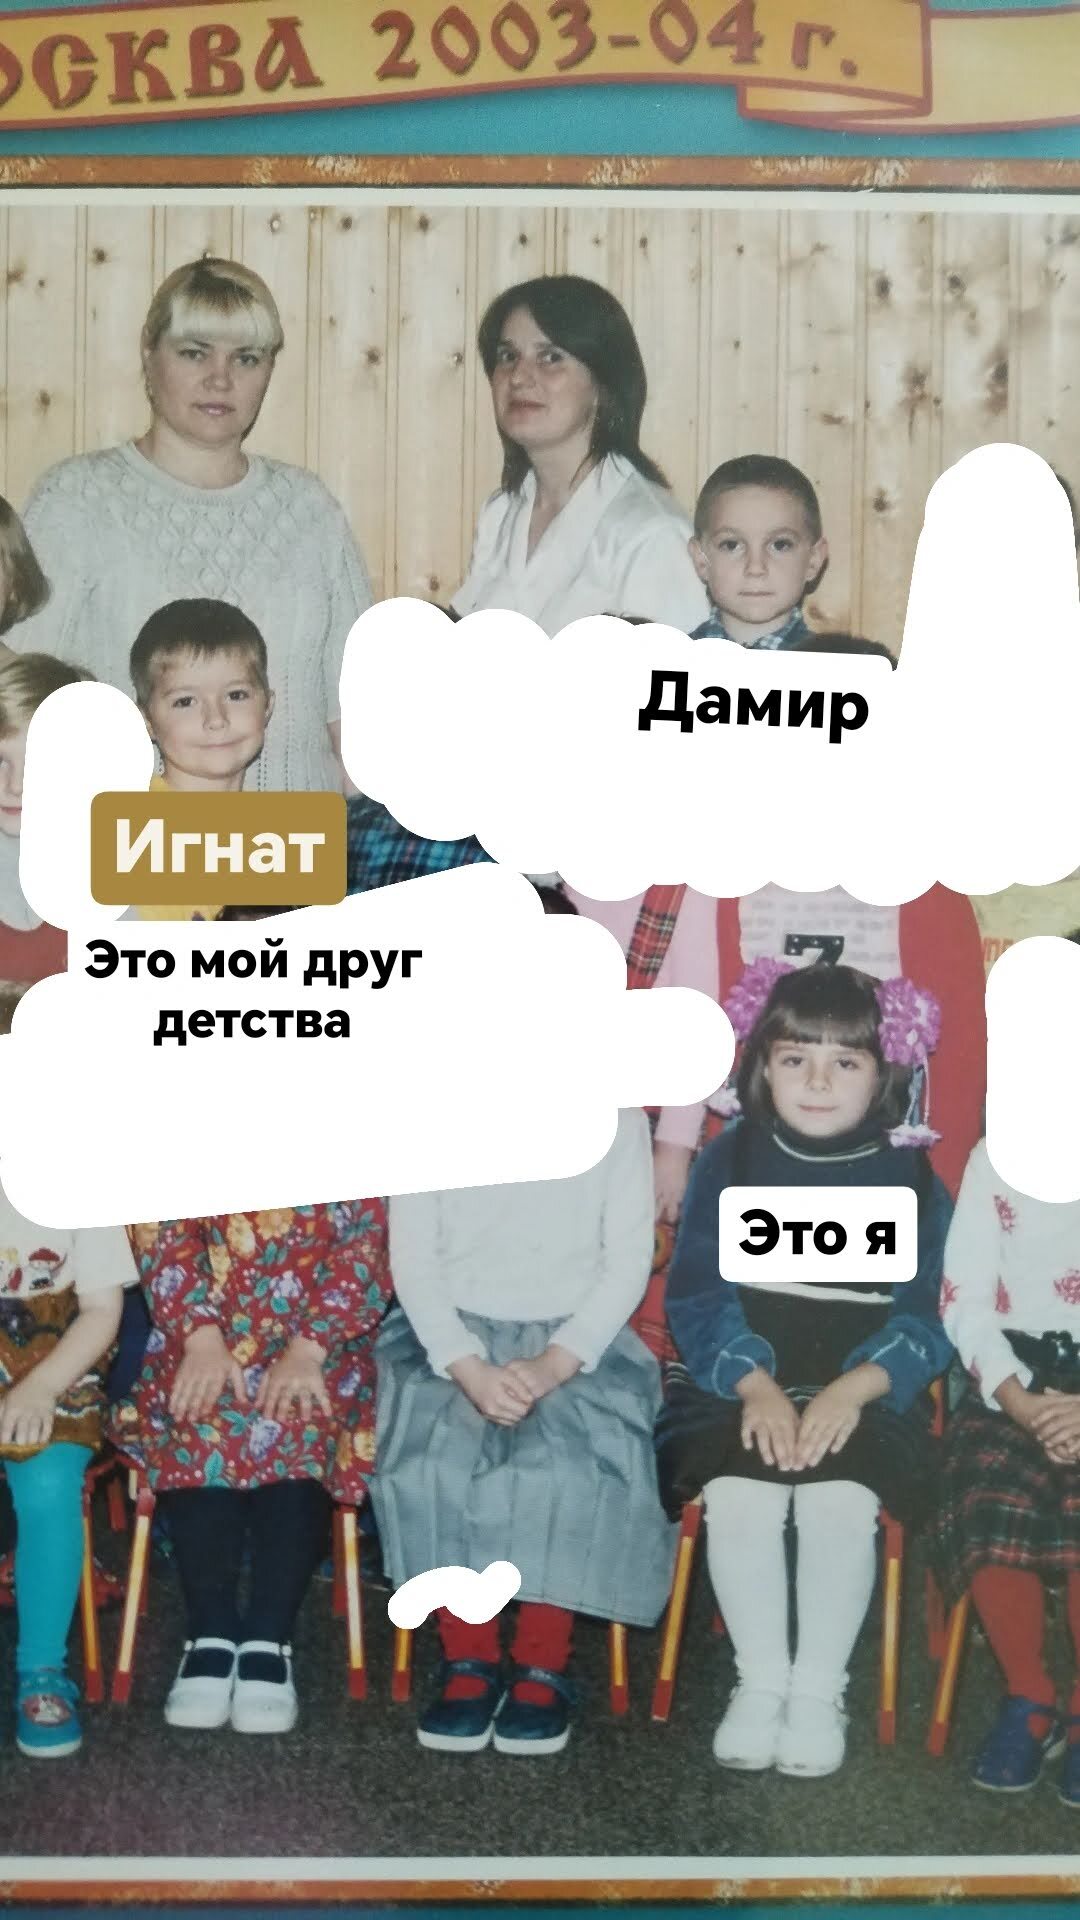 10 years of emigration in Serbia: why I’m looking for a childhood friend from Moscow - People search, Childhood, Childhood memories, friendship, Emigration, Relocation, Living abroad, VKontakte (link), Instagram (link), Longpost